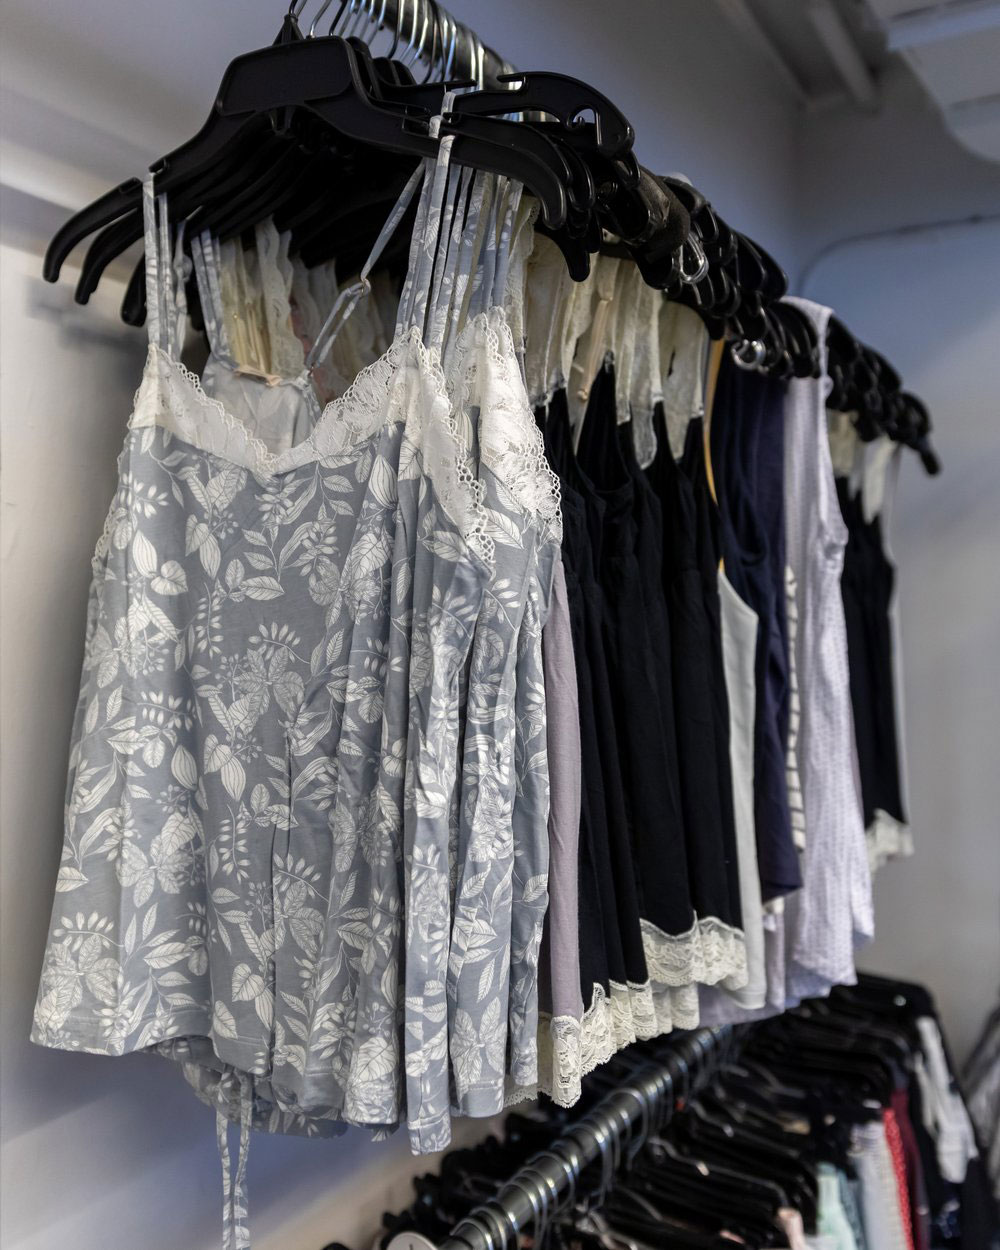 Eberjey & TOCCA Sample Sale in Images